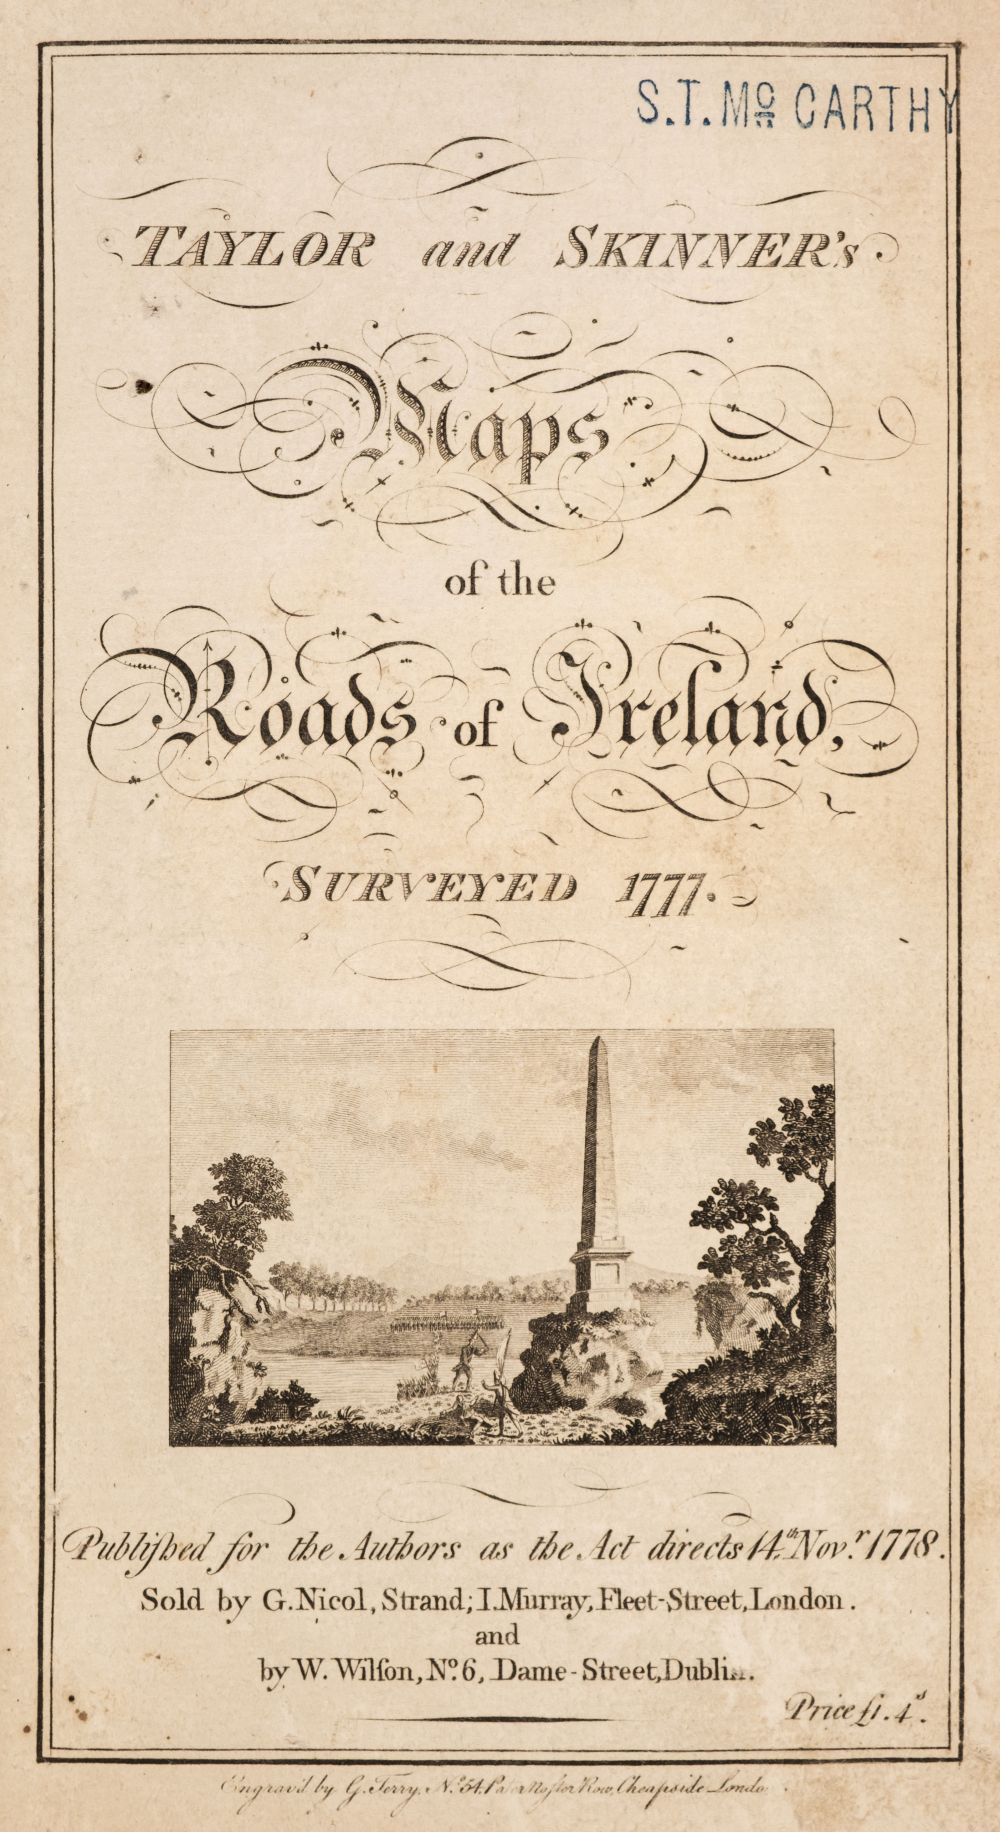 Taylor (George) & Skinner (Andrew). Maps of the Roads of Ireland, London: For the Author, 1778